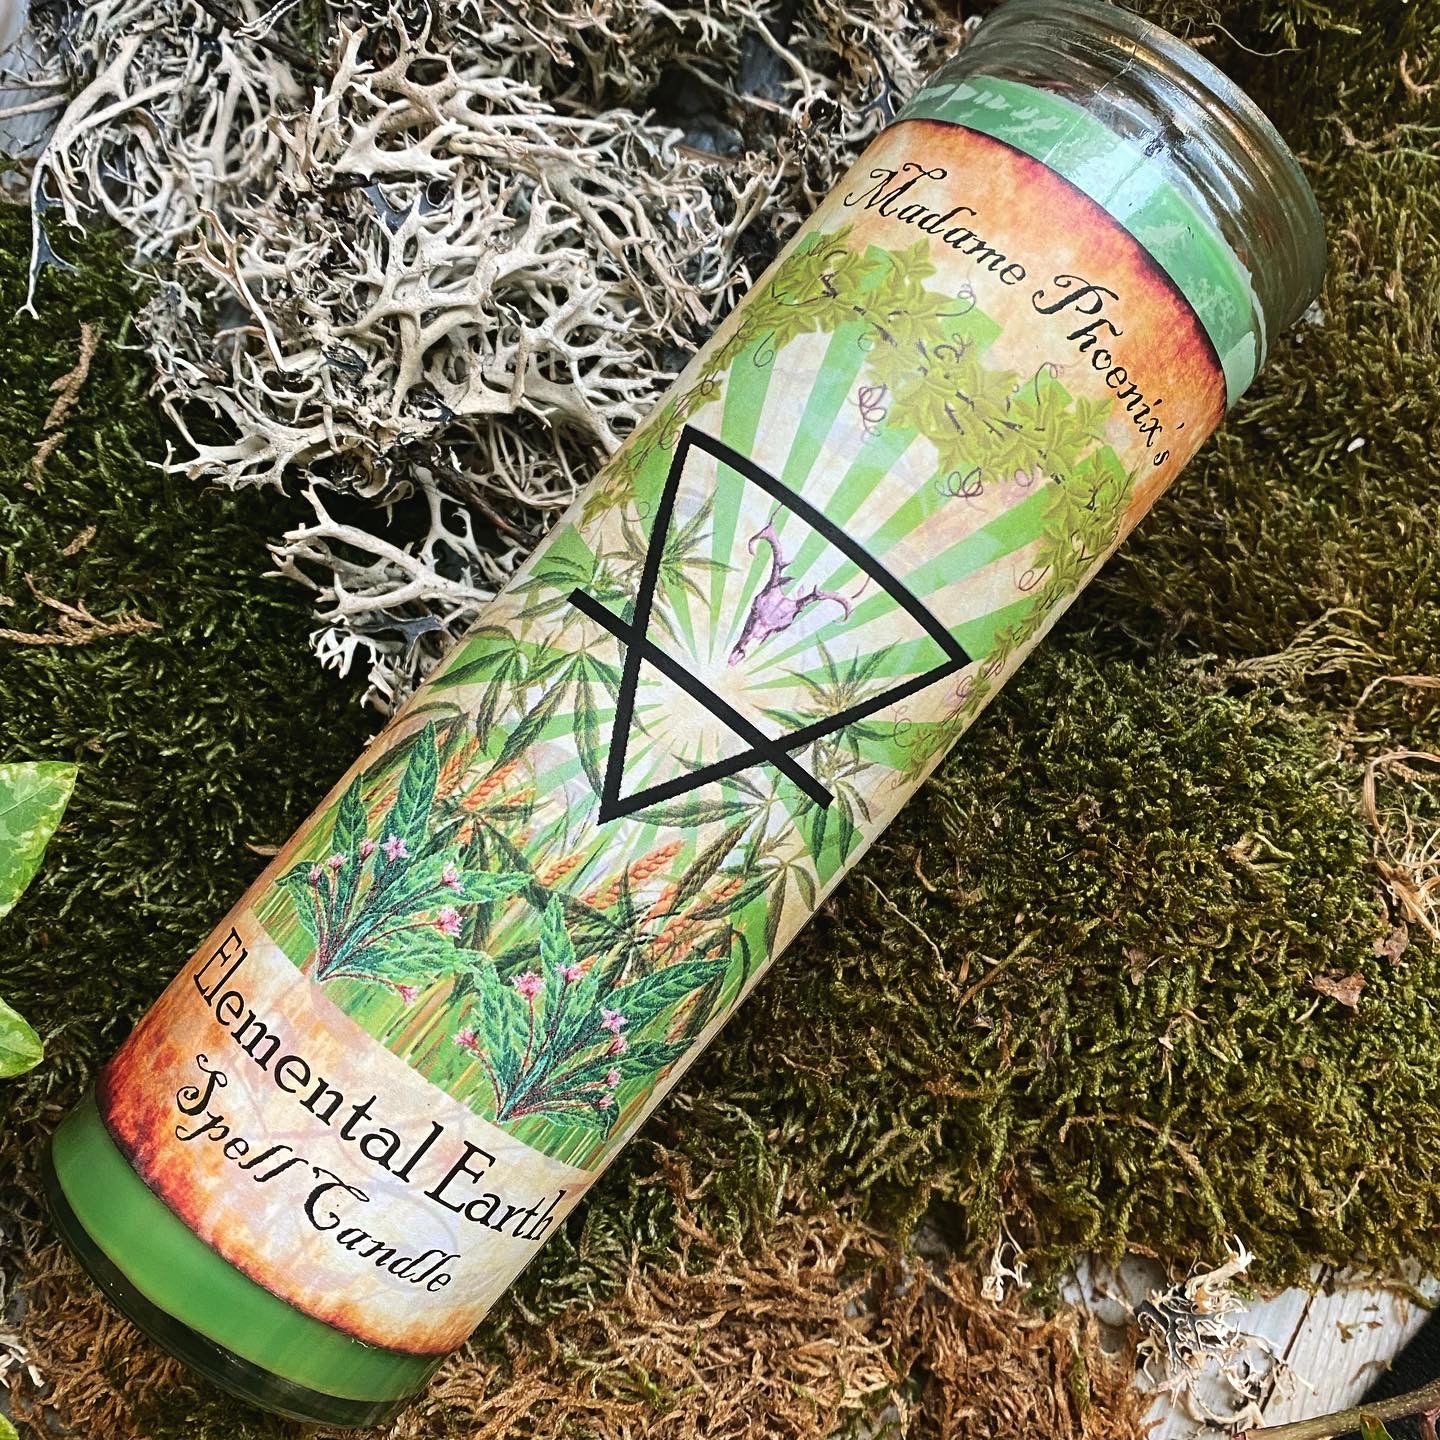 7 day style EARTH Elemental Magic Spell Candles